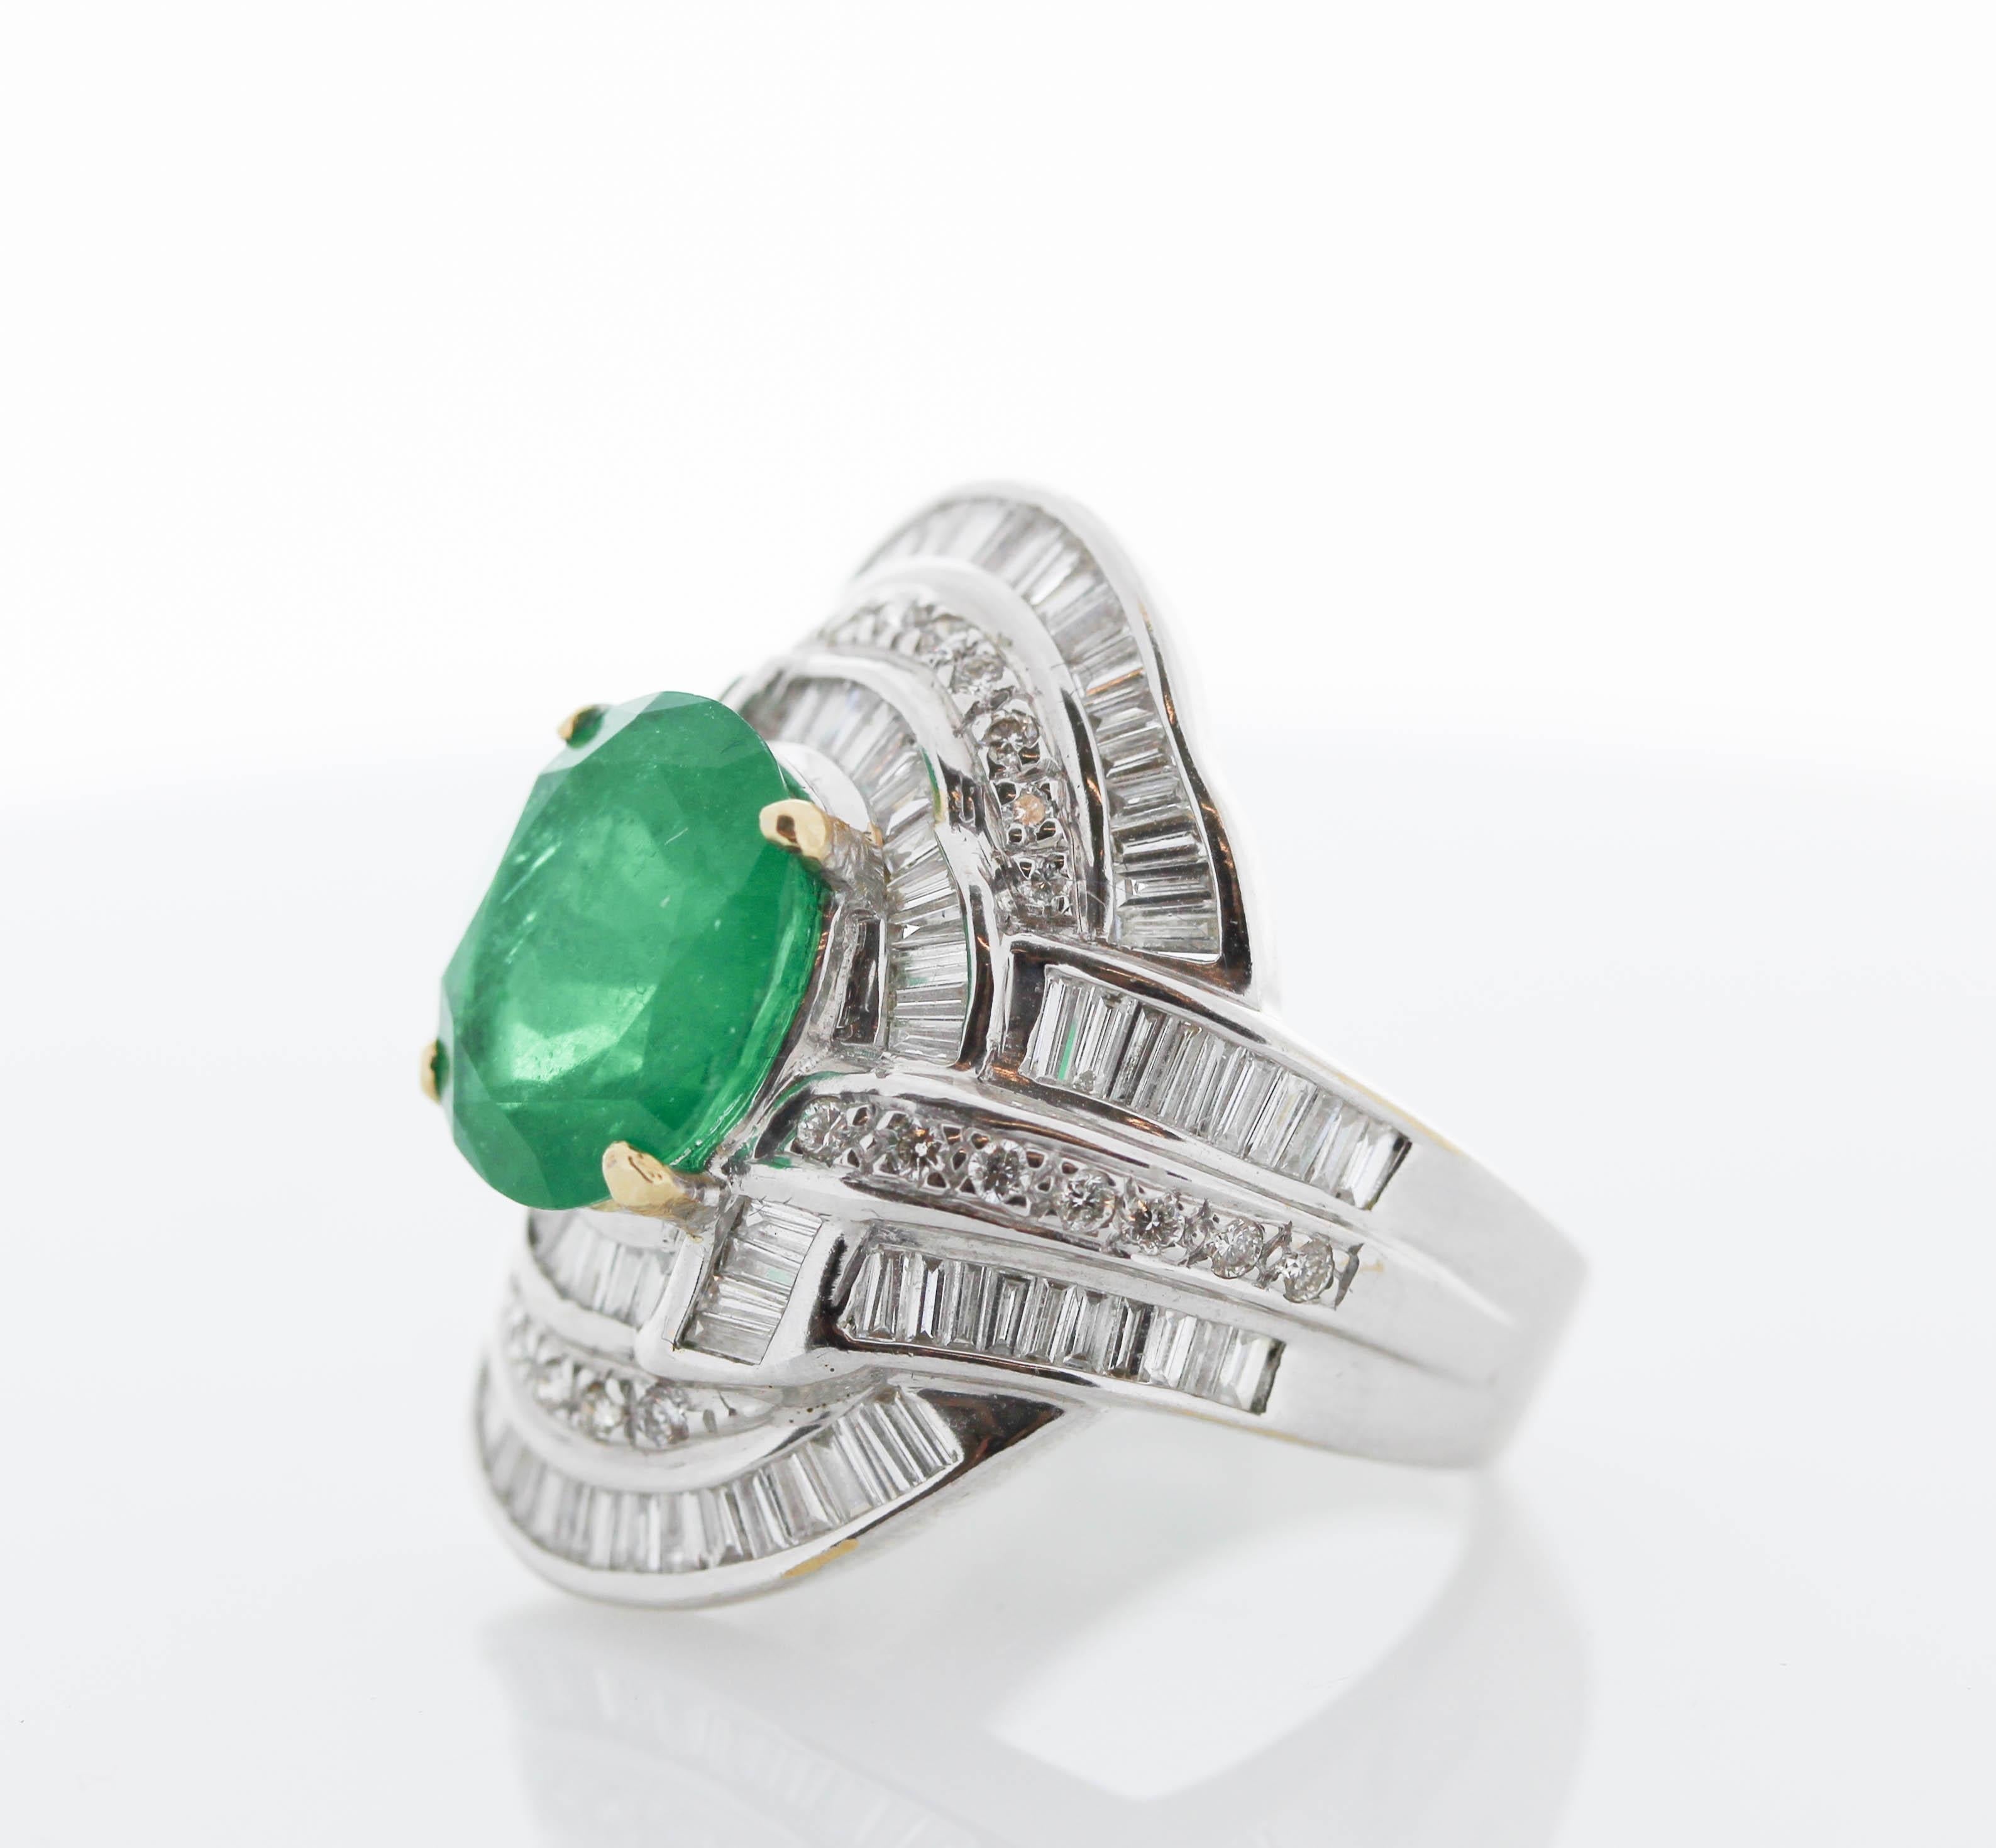 Contemporary 3.89 Carat Oval Emerald & Diamond Cocktail Ring in 18K White Gold For Sale